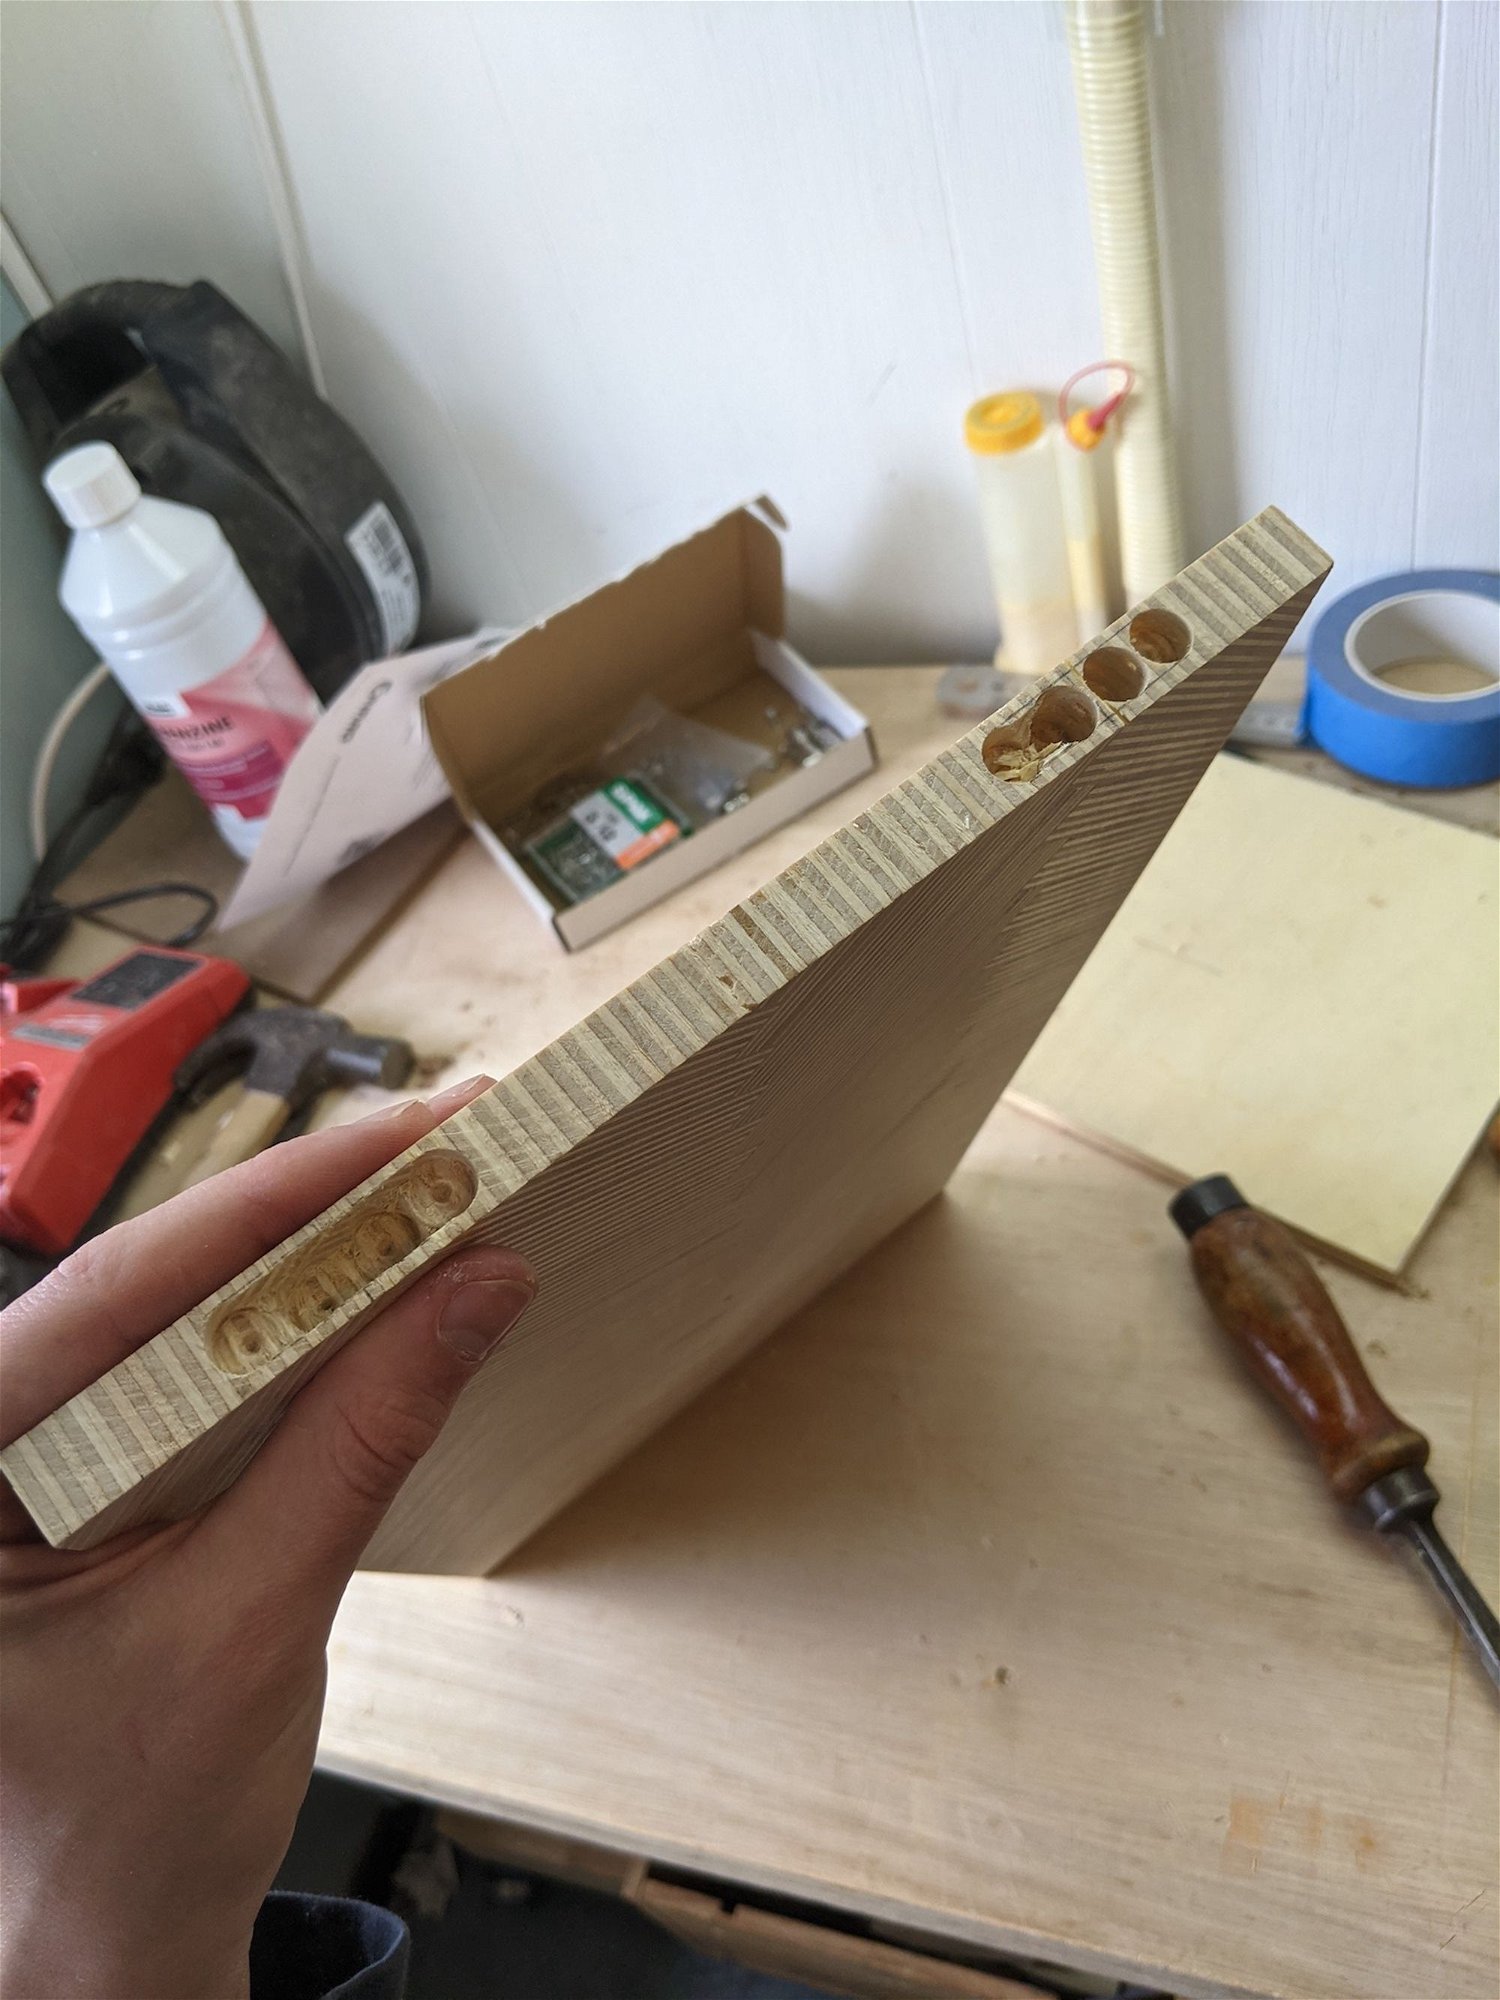 I squared off the piece and started to work on the hinges. I really challenged myself here using invisible soss 101 hinges. With the plywood being so thin on the sides, i had to be really careful using the drill chisel.